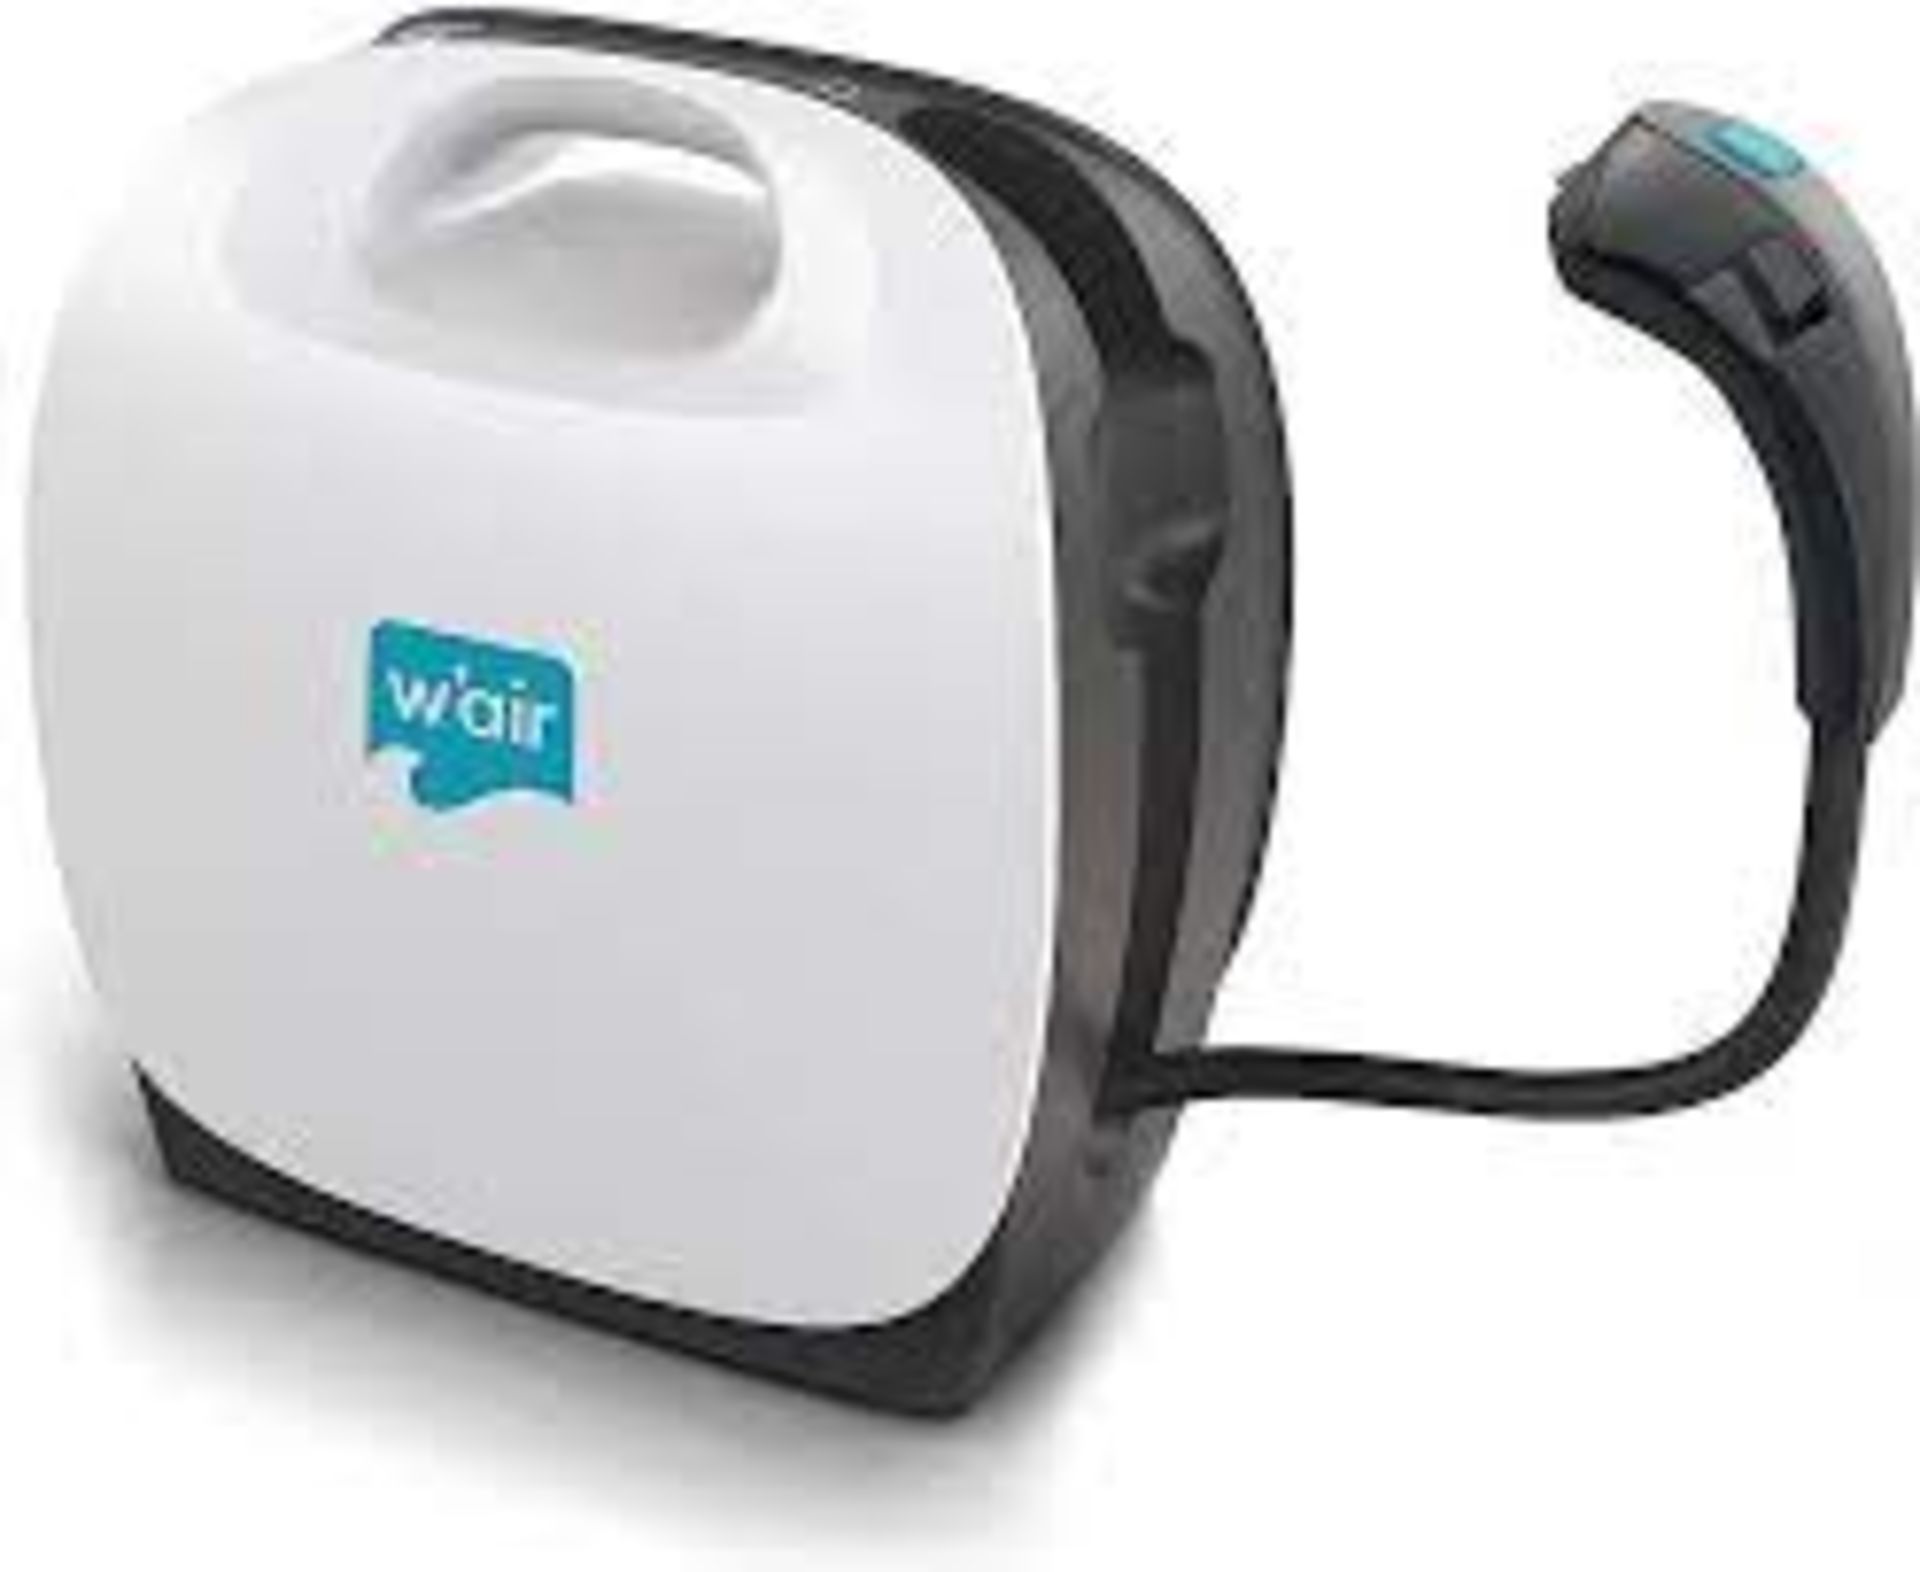 BRAND NEW W'AIR SNEAKER CLEANING SYSTEMS RRP £299, The w'air uses hydrodynamic technology - Image 6 of 6